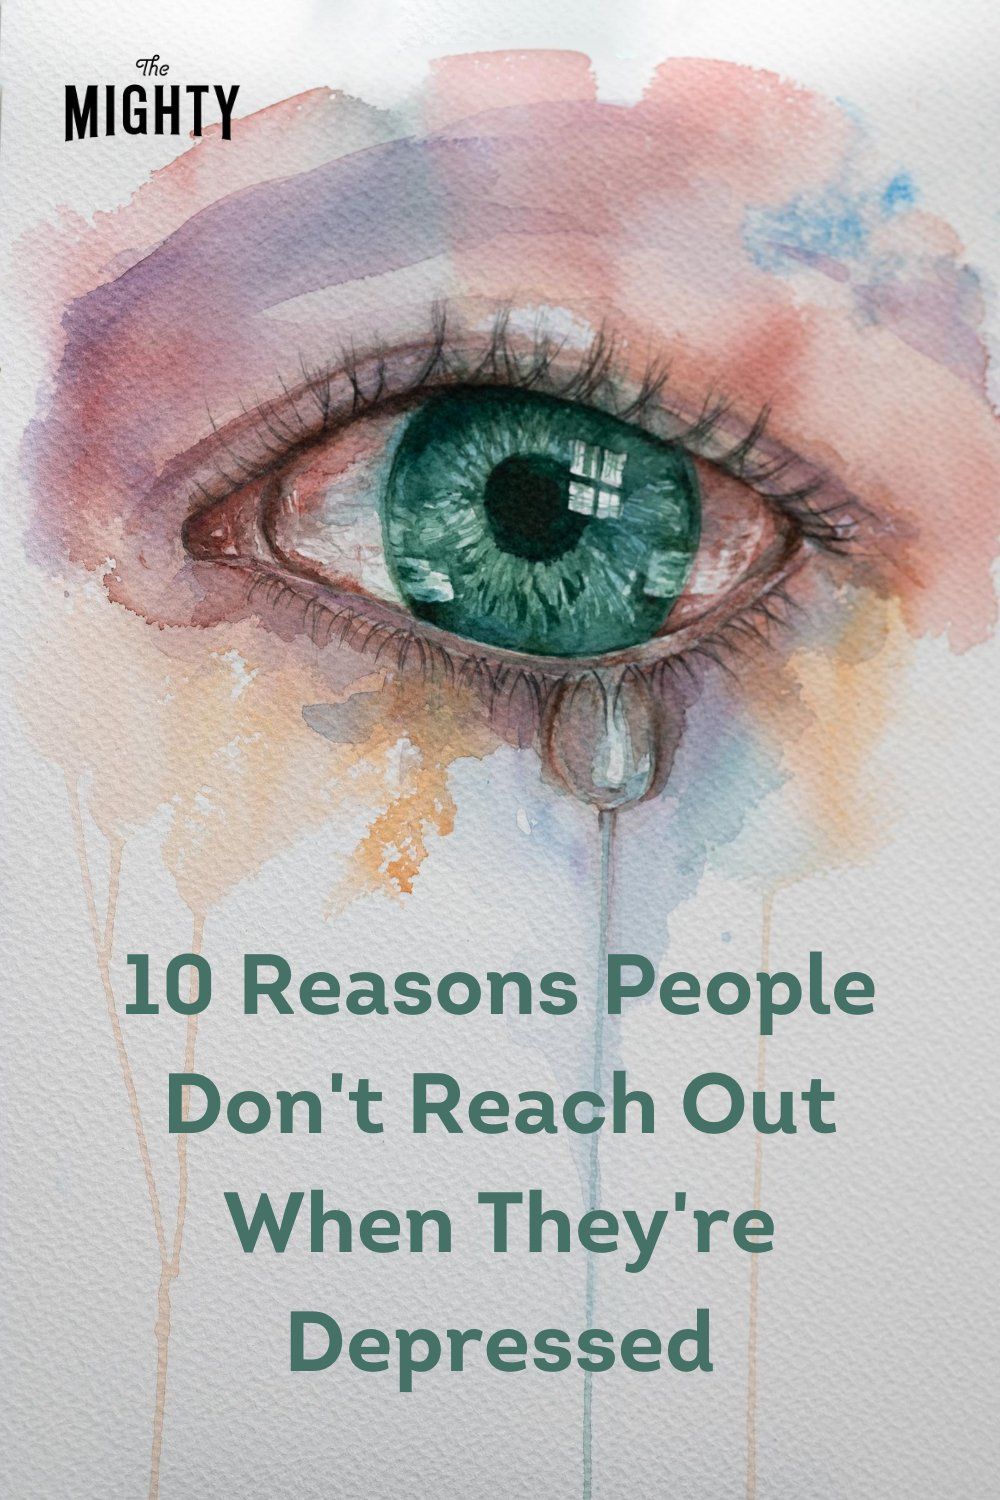 10 Reasons People Don't Reach Out When They're Depressed